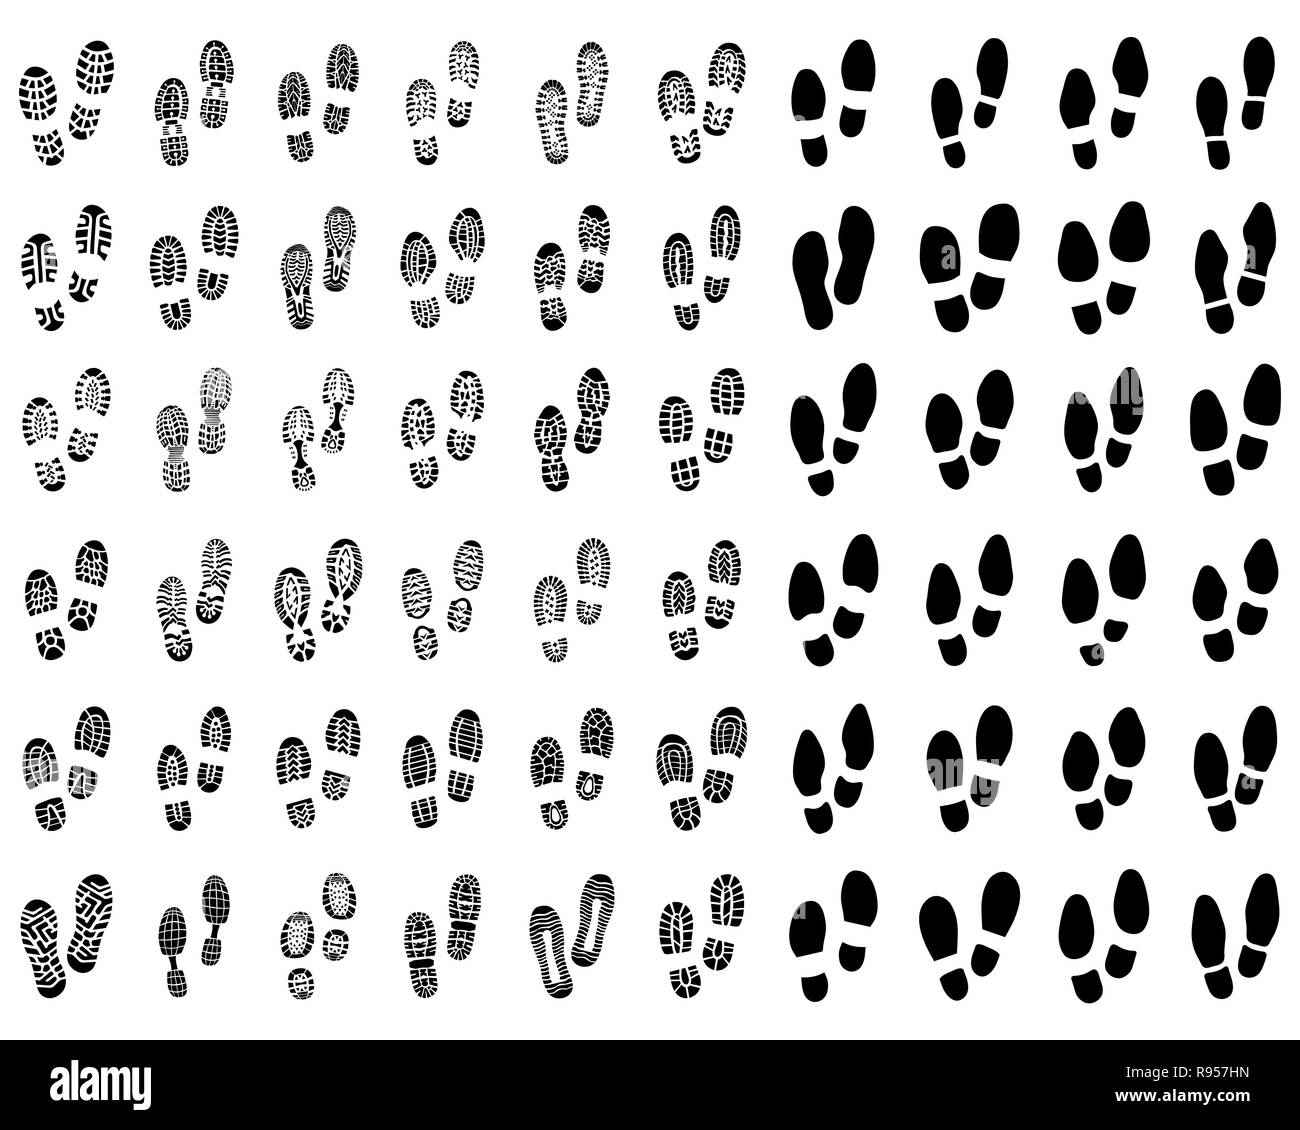 Black prints of shoes on a white background, vector Stock Photo